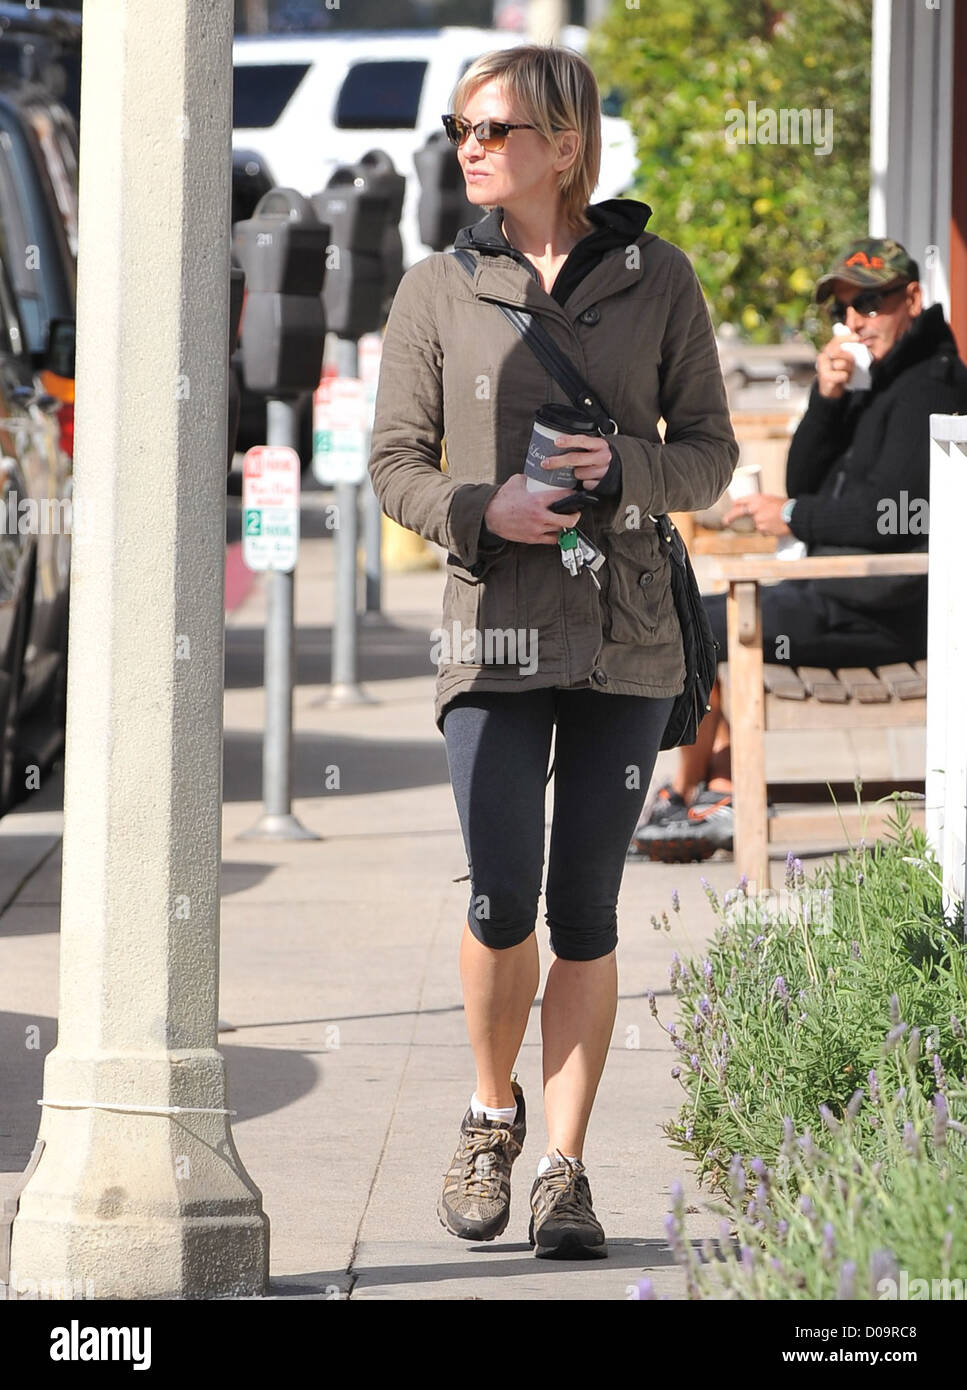 Renee Zellweger in gym wear heads home after having lunch with a friend at Caffe Luxxe in Santa Monica Santa Monica California Stock Photo